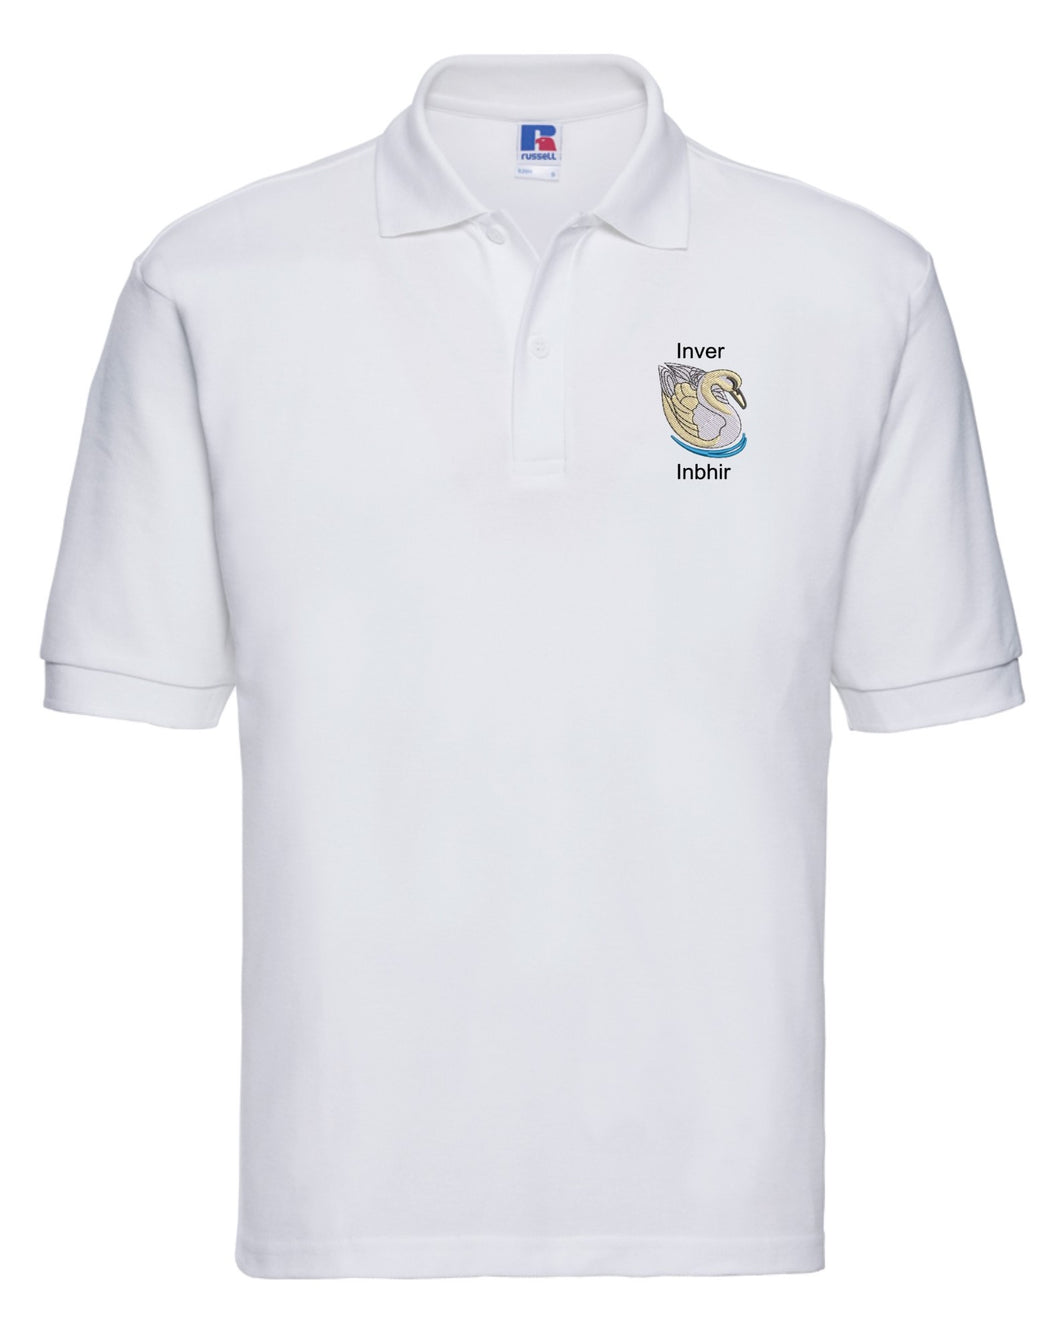 Inver Primary Polo Shirt